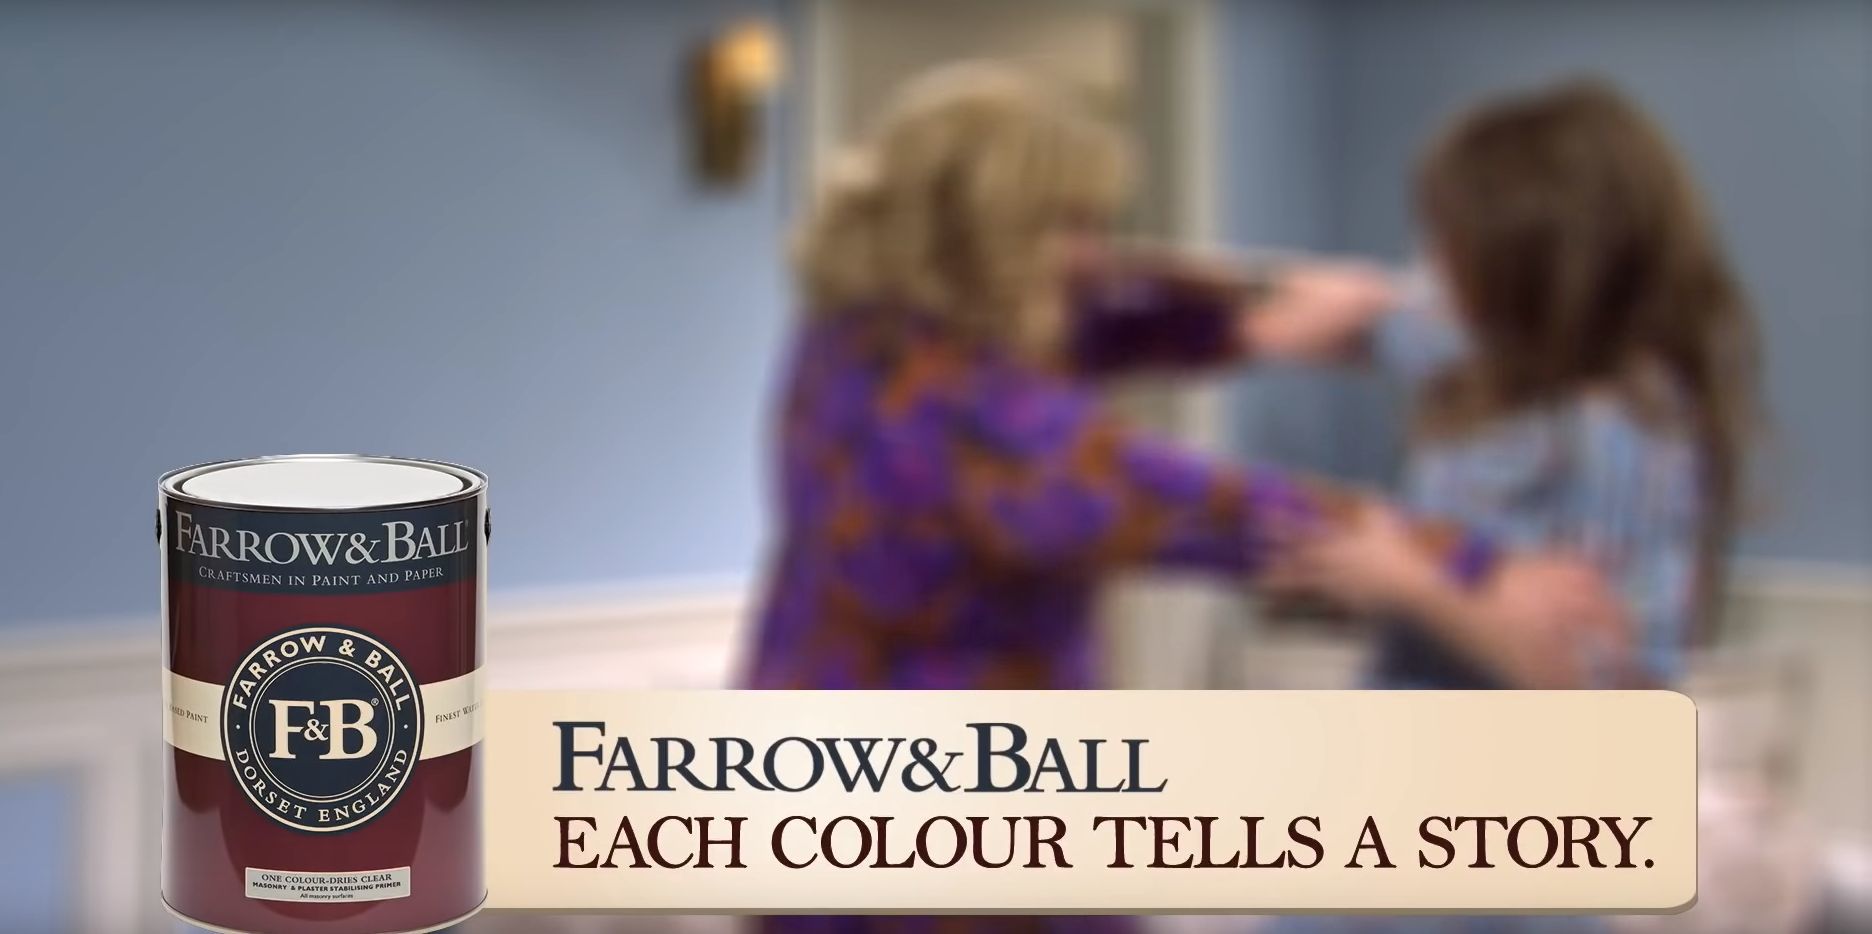 A Saturday Night Live sketch referencing Farrow & Ball